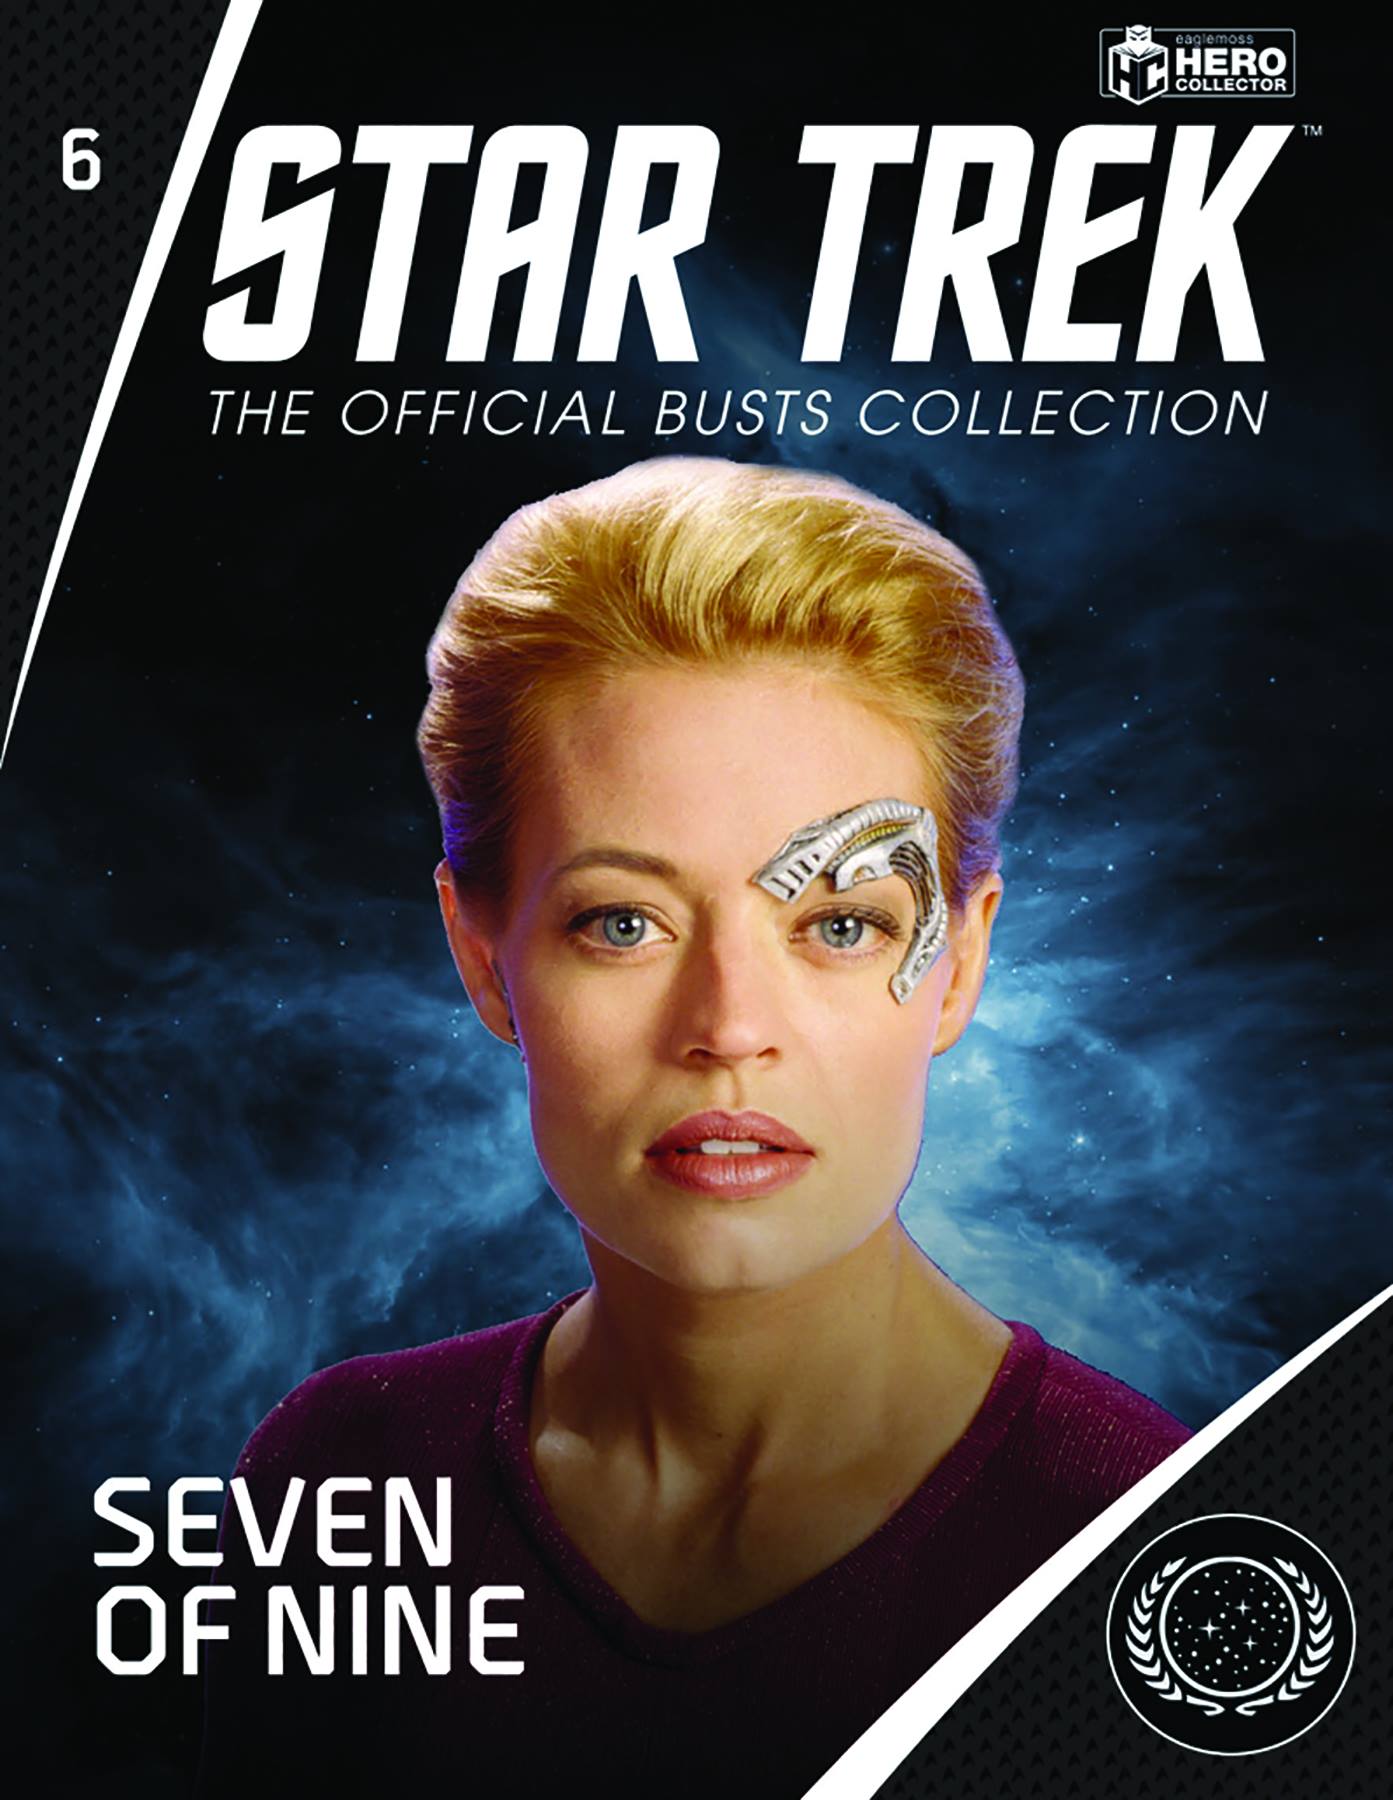 Star Trek: The Official Busts Collection #6.jpg